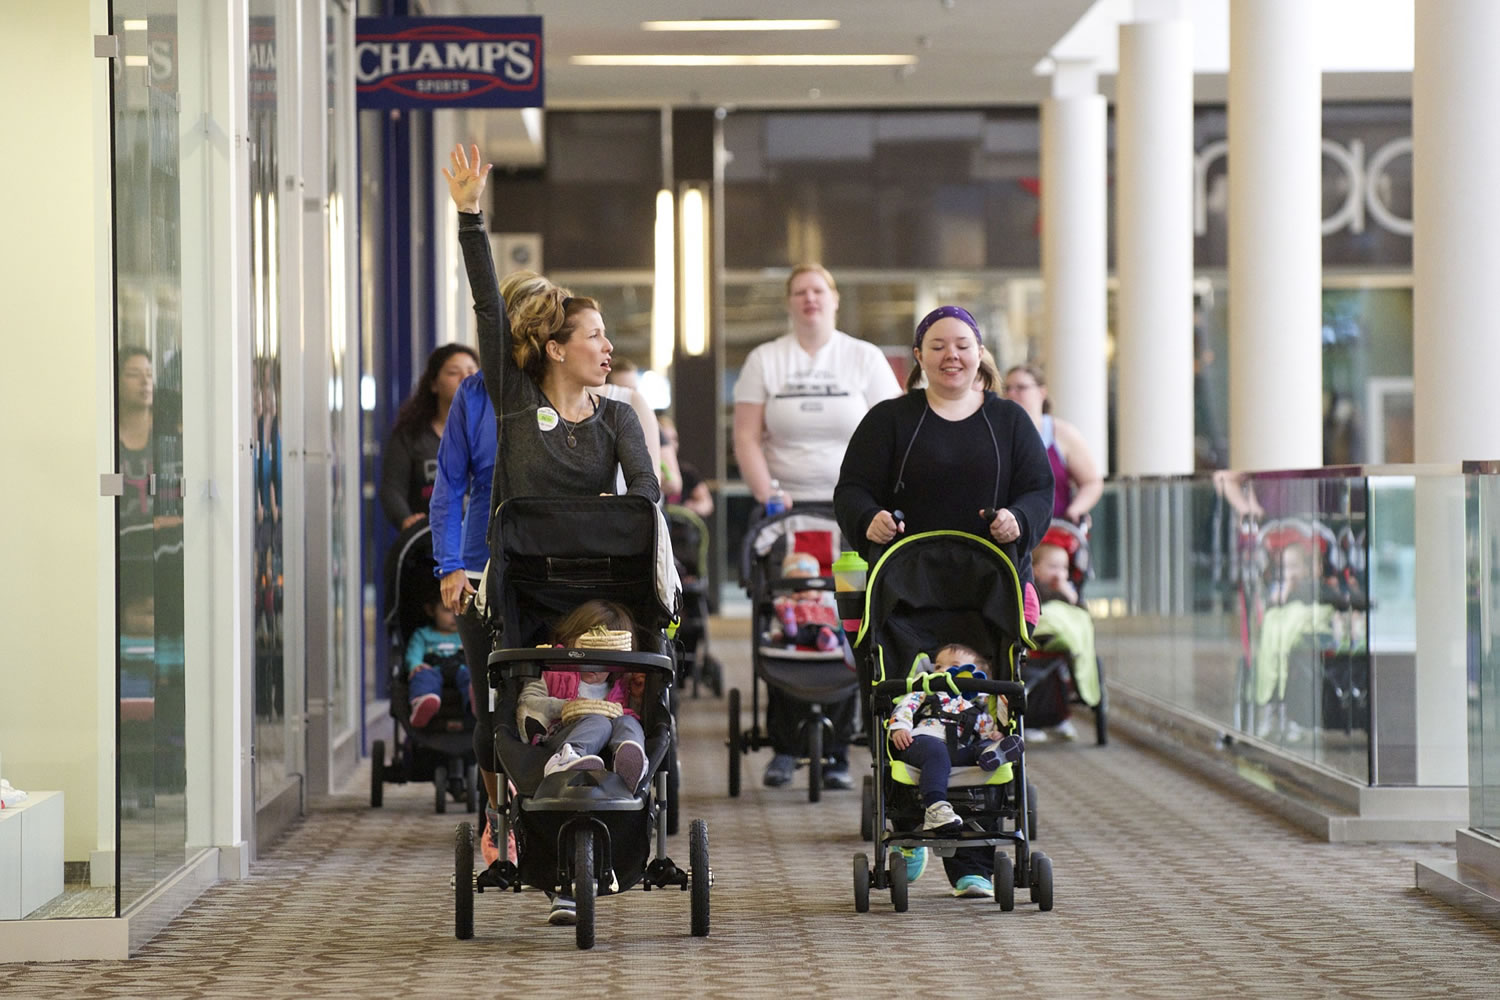 Vancouver moms Reagen Darling, left, and Shelly Stafford walk a lap around the Westfield Vancouver mall during a recent Barbells and Bottles class.